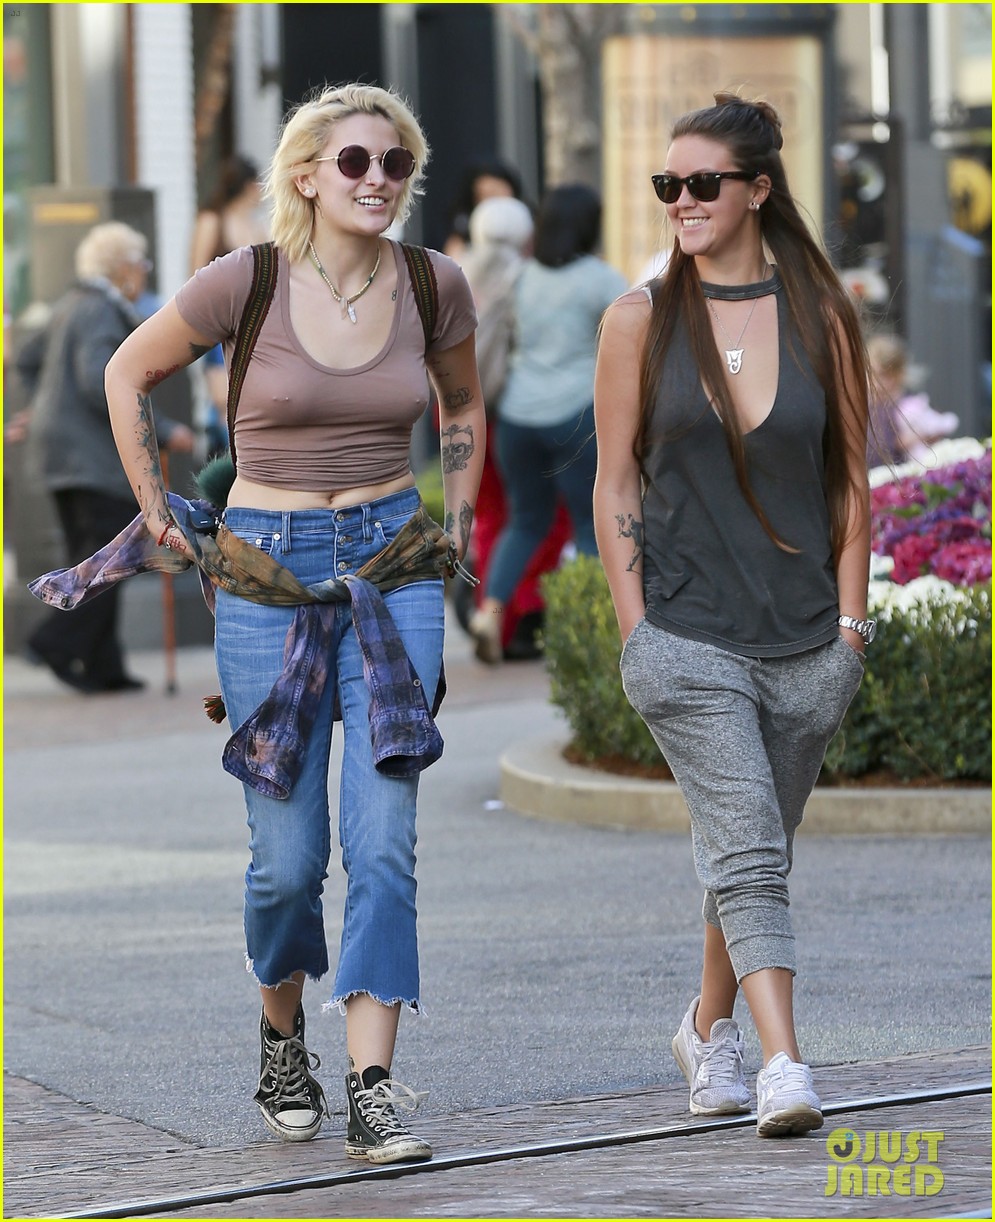 paris jackson goes braless for shopping trip with prudence brando 02